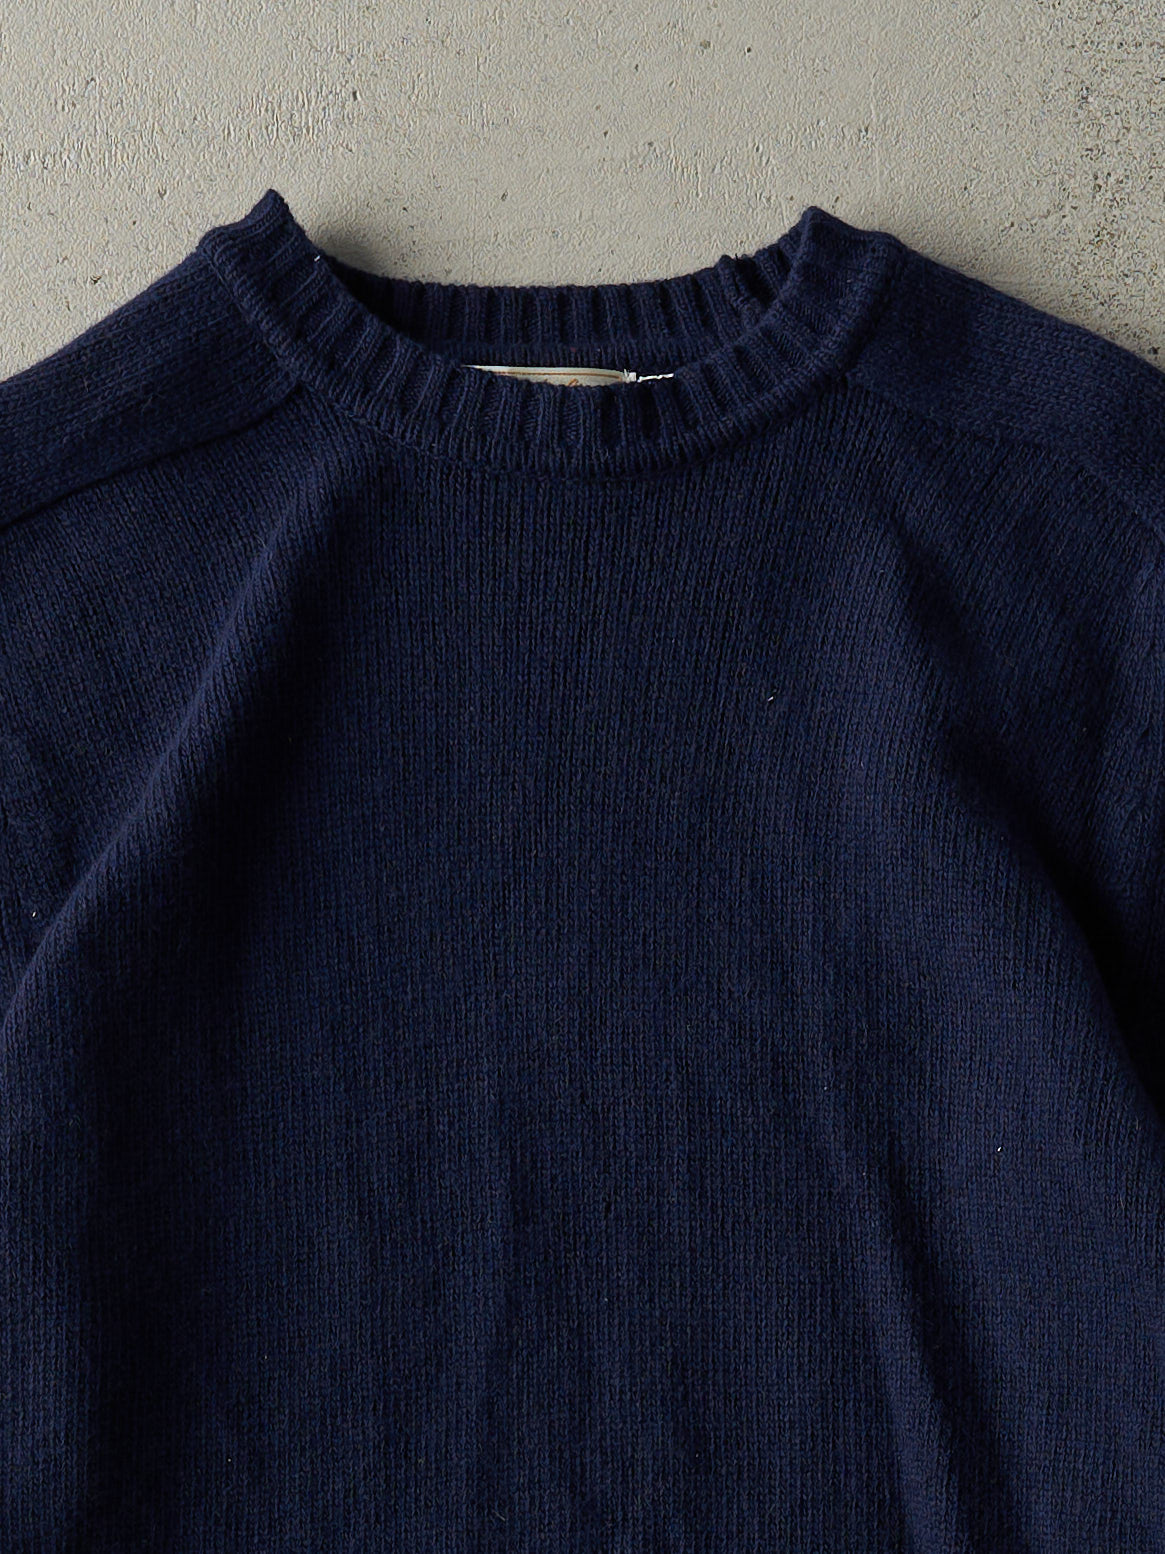 Vintage 70s Navy Blue Wool Knit Pullover (S)